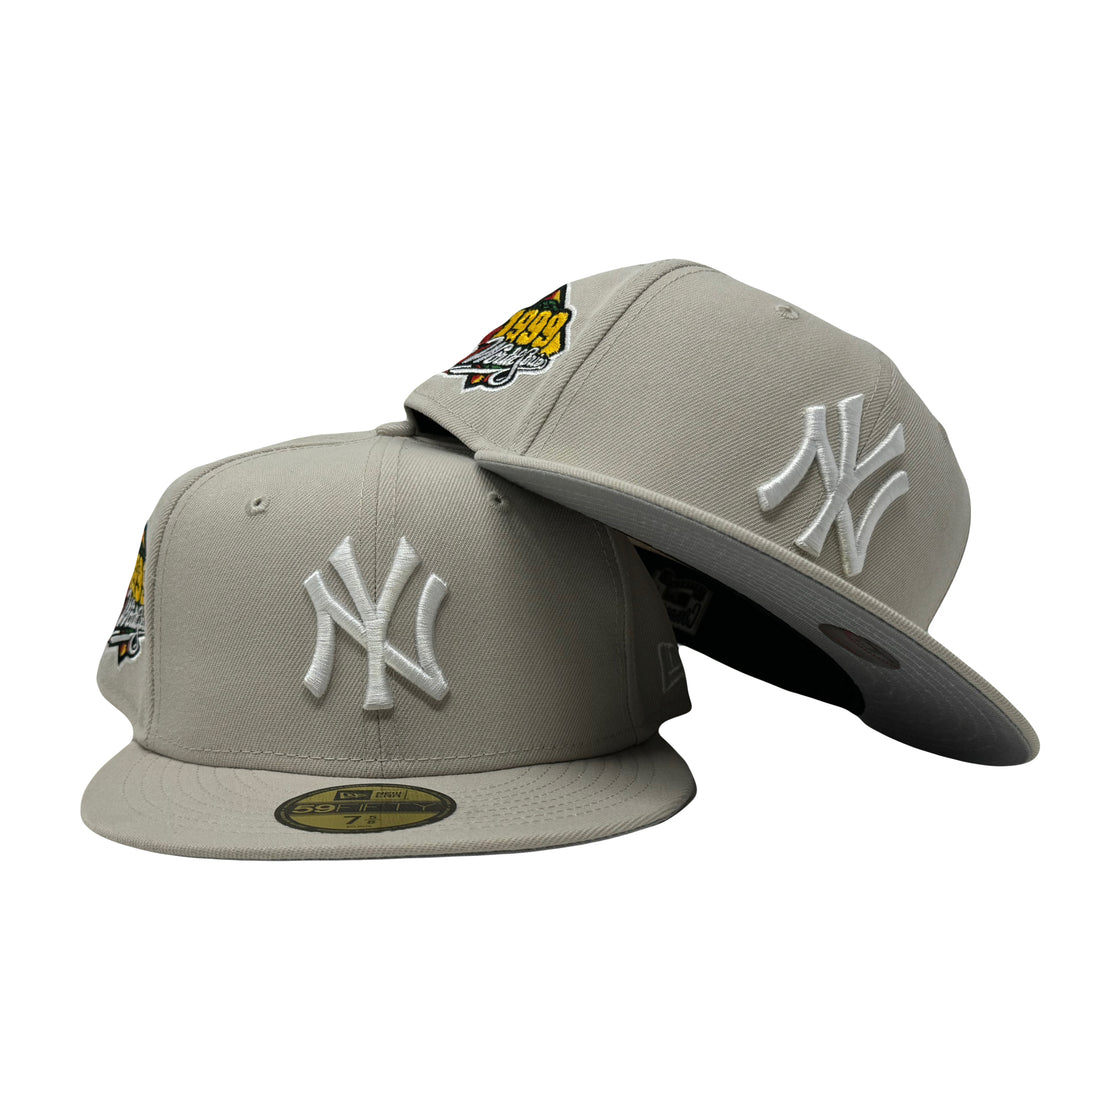 New York Yankees 1999 World Series Stone Color 5950 New Era Fitted Hat